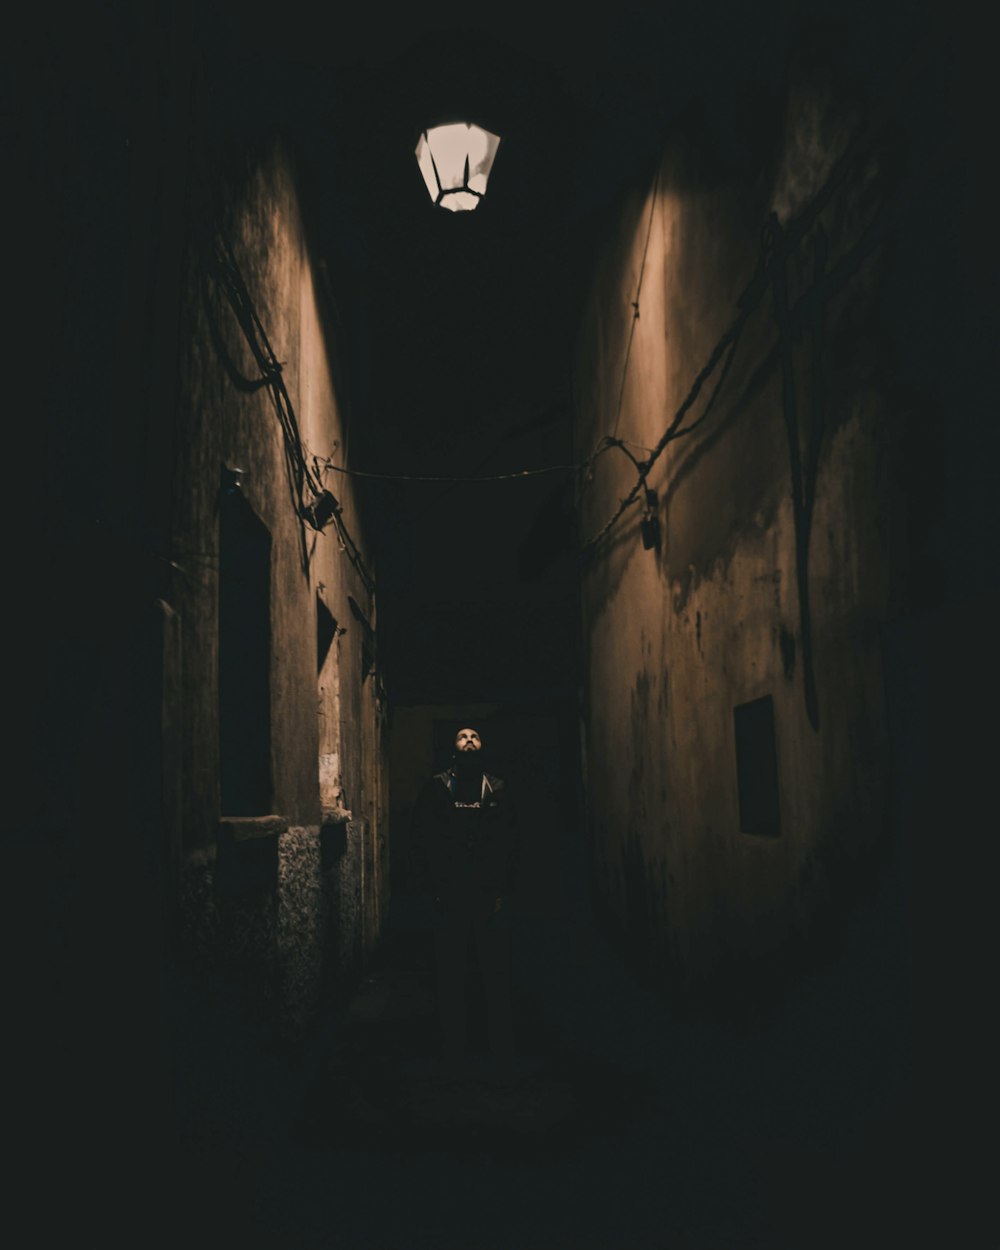 a dark alley way with a light on the ceiling